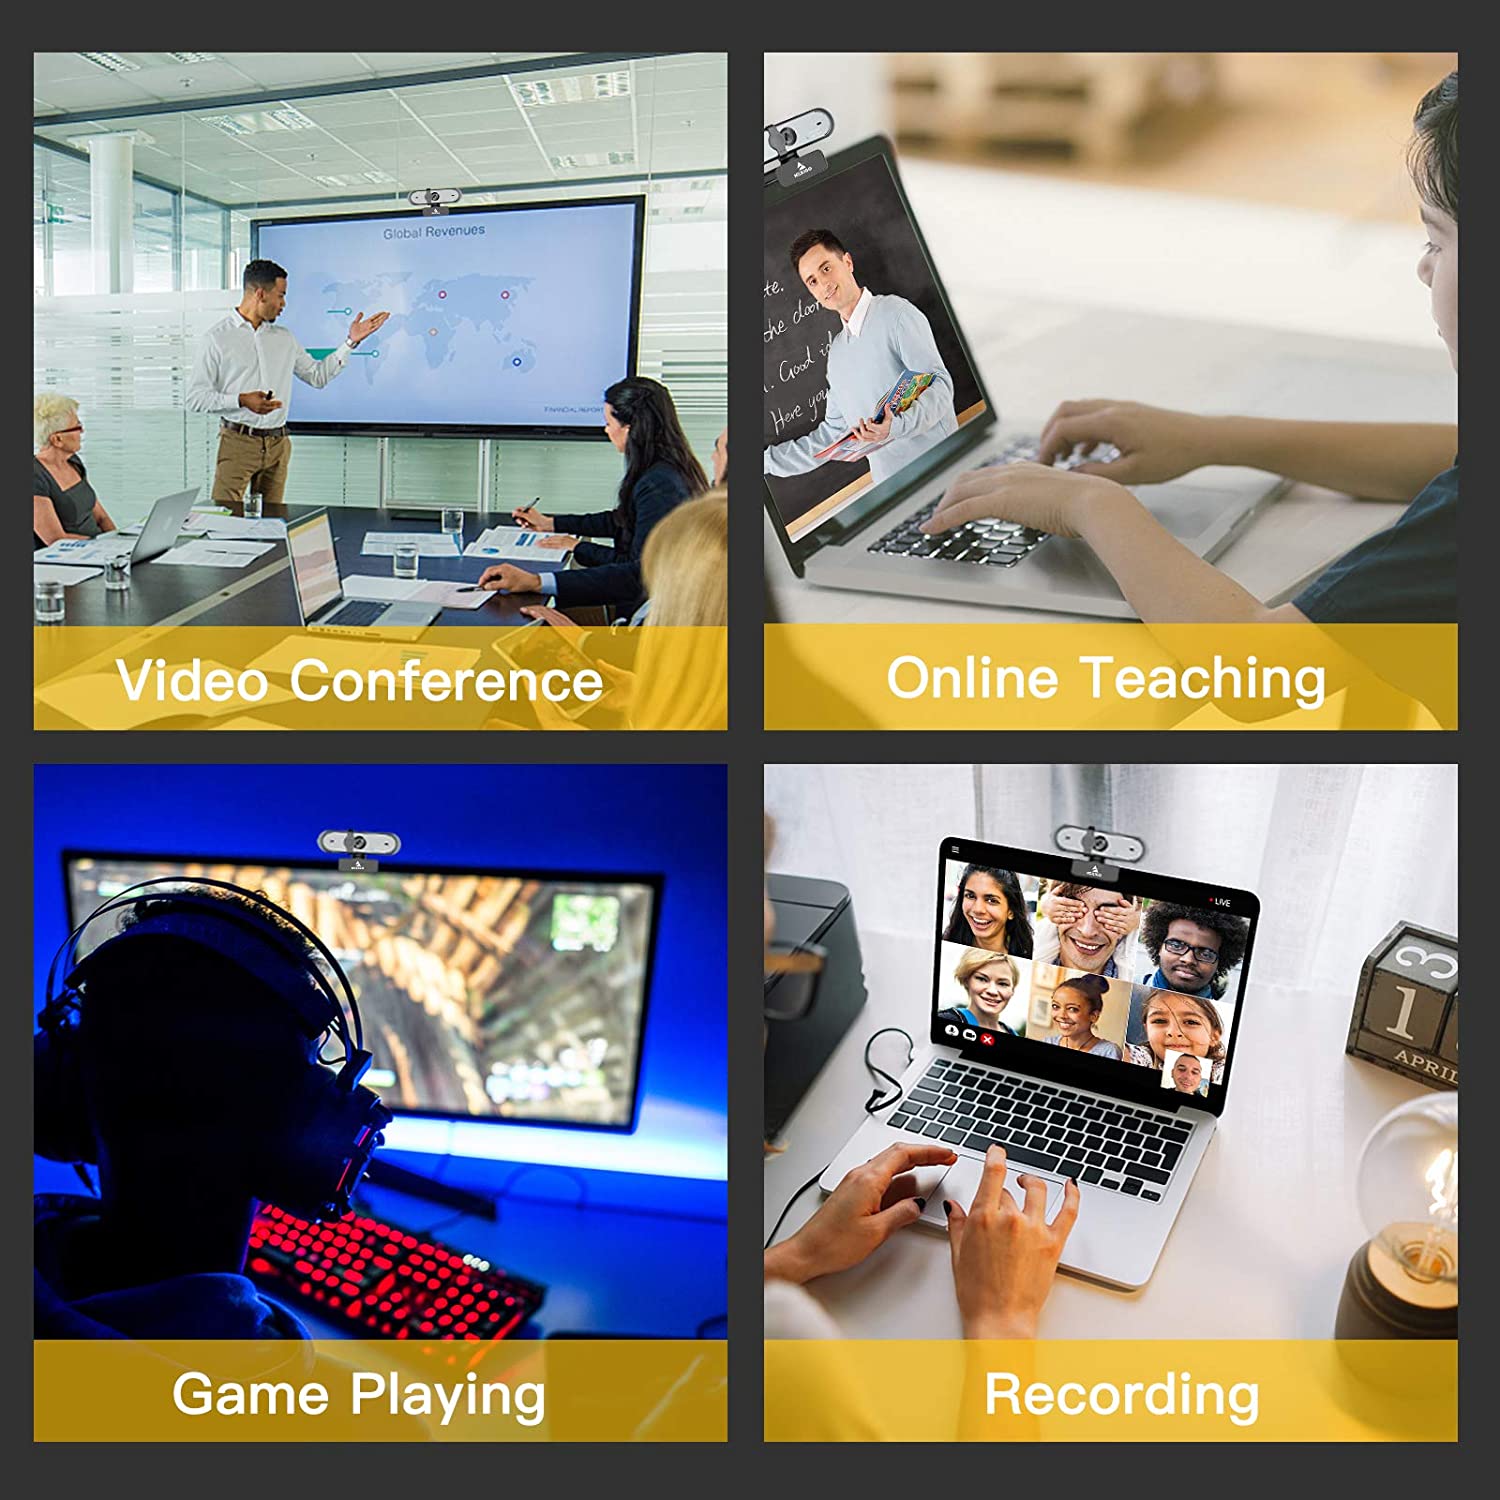 Four versatile applications: Video Conference, Game Playing, Online Teaching, Recording